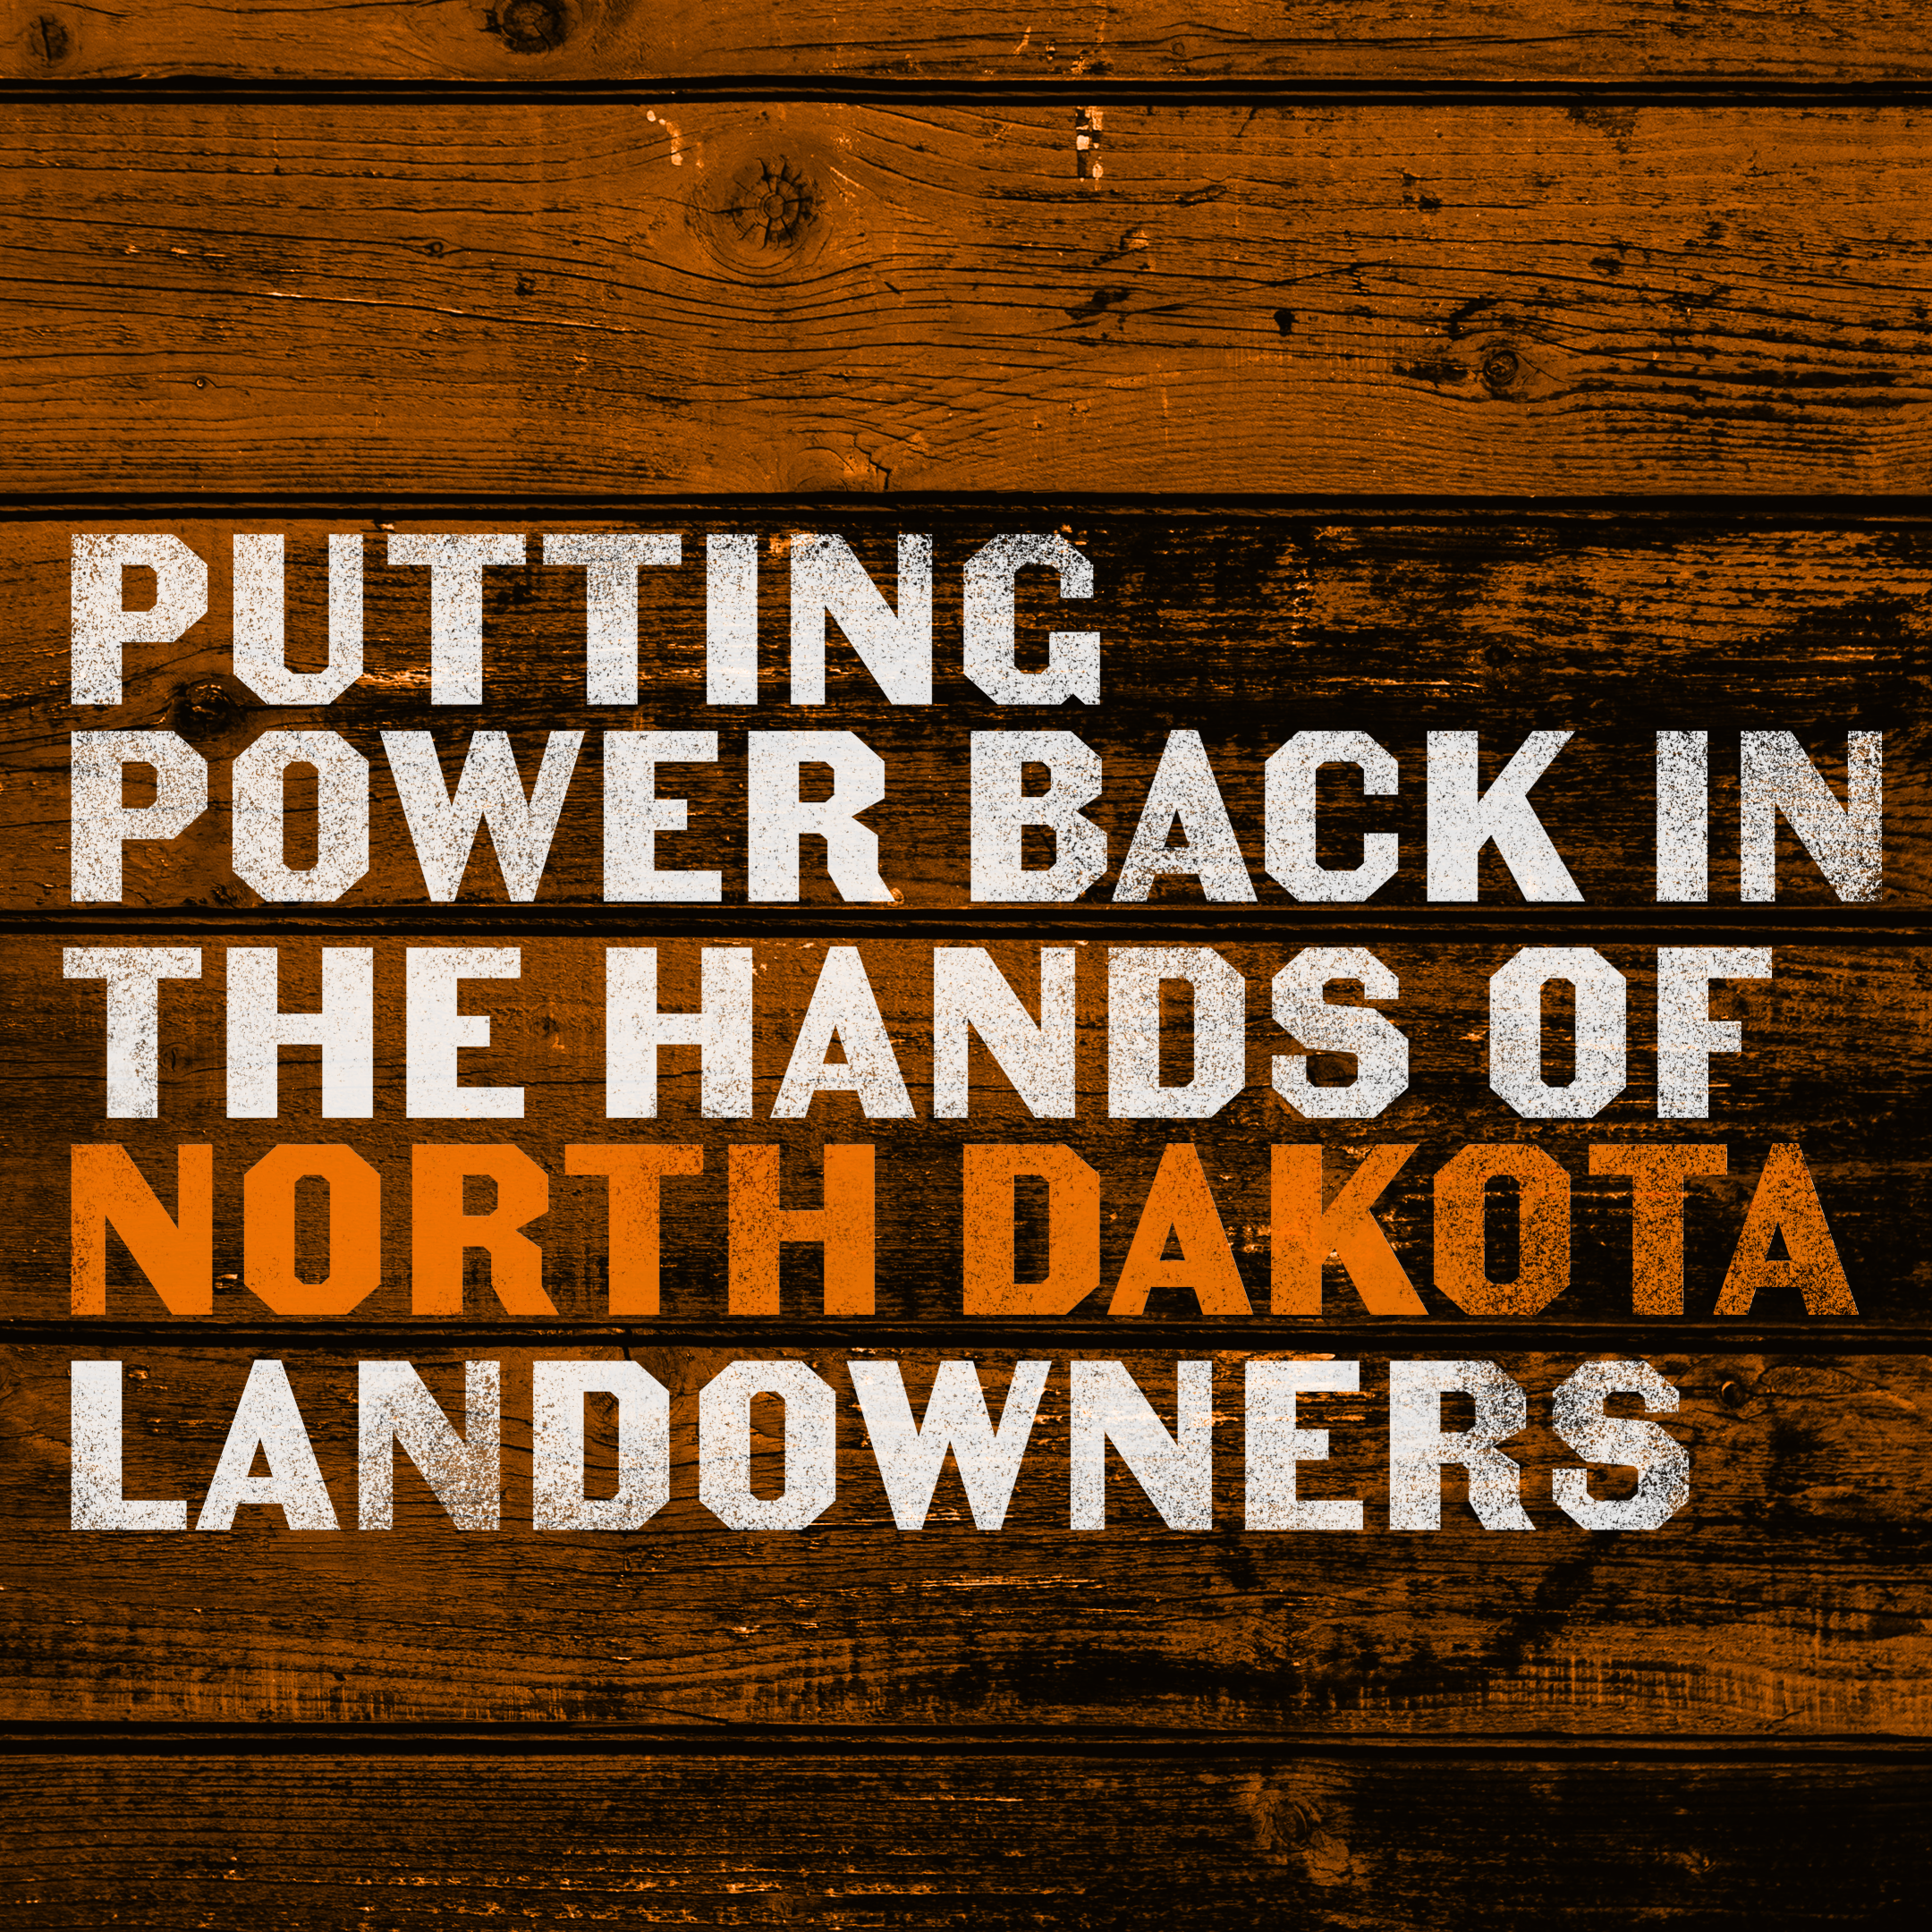 Orange barn wood with white text PUTTING THE POWER BACK IN THE HANDS OF NORTH DAKOTA LANDOWNERS.